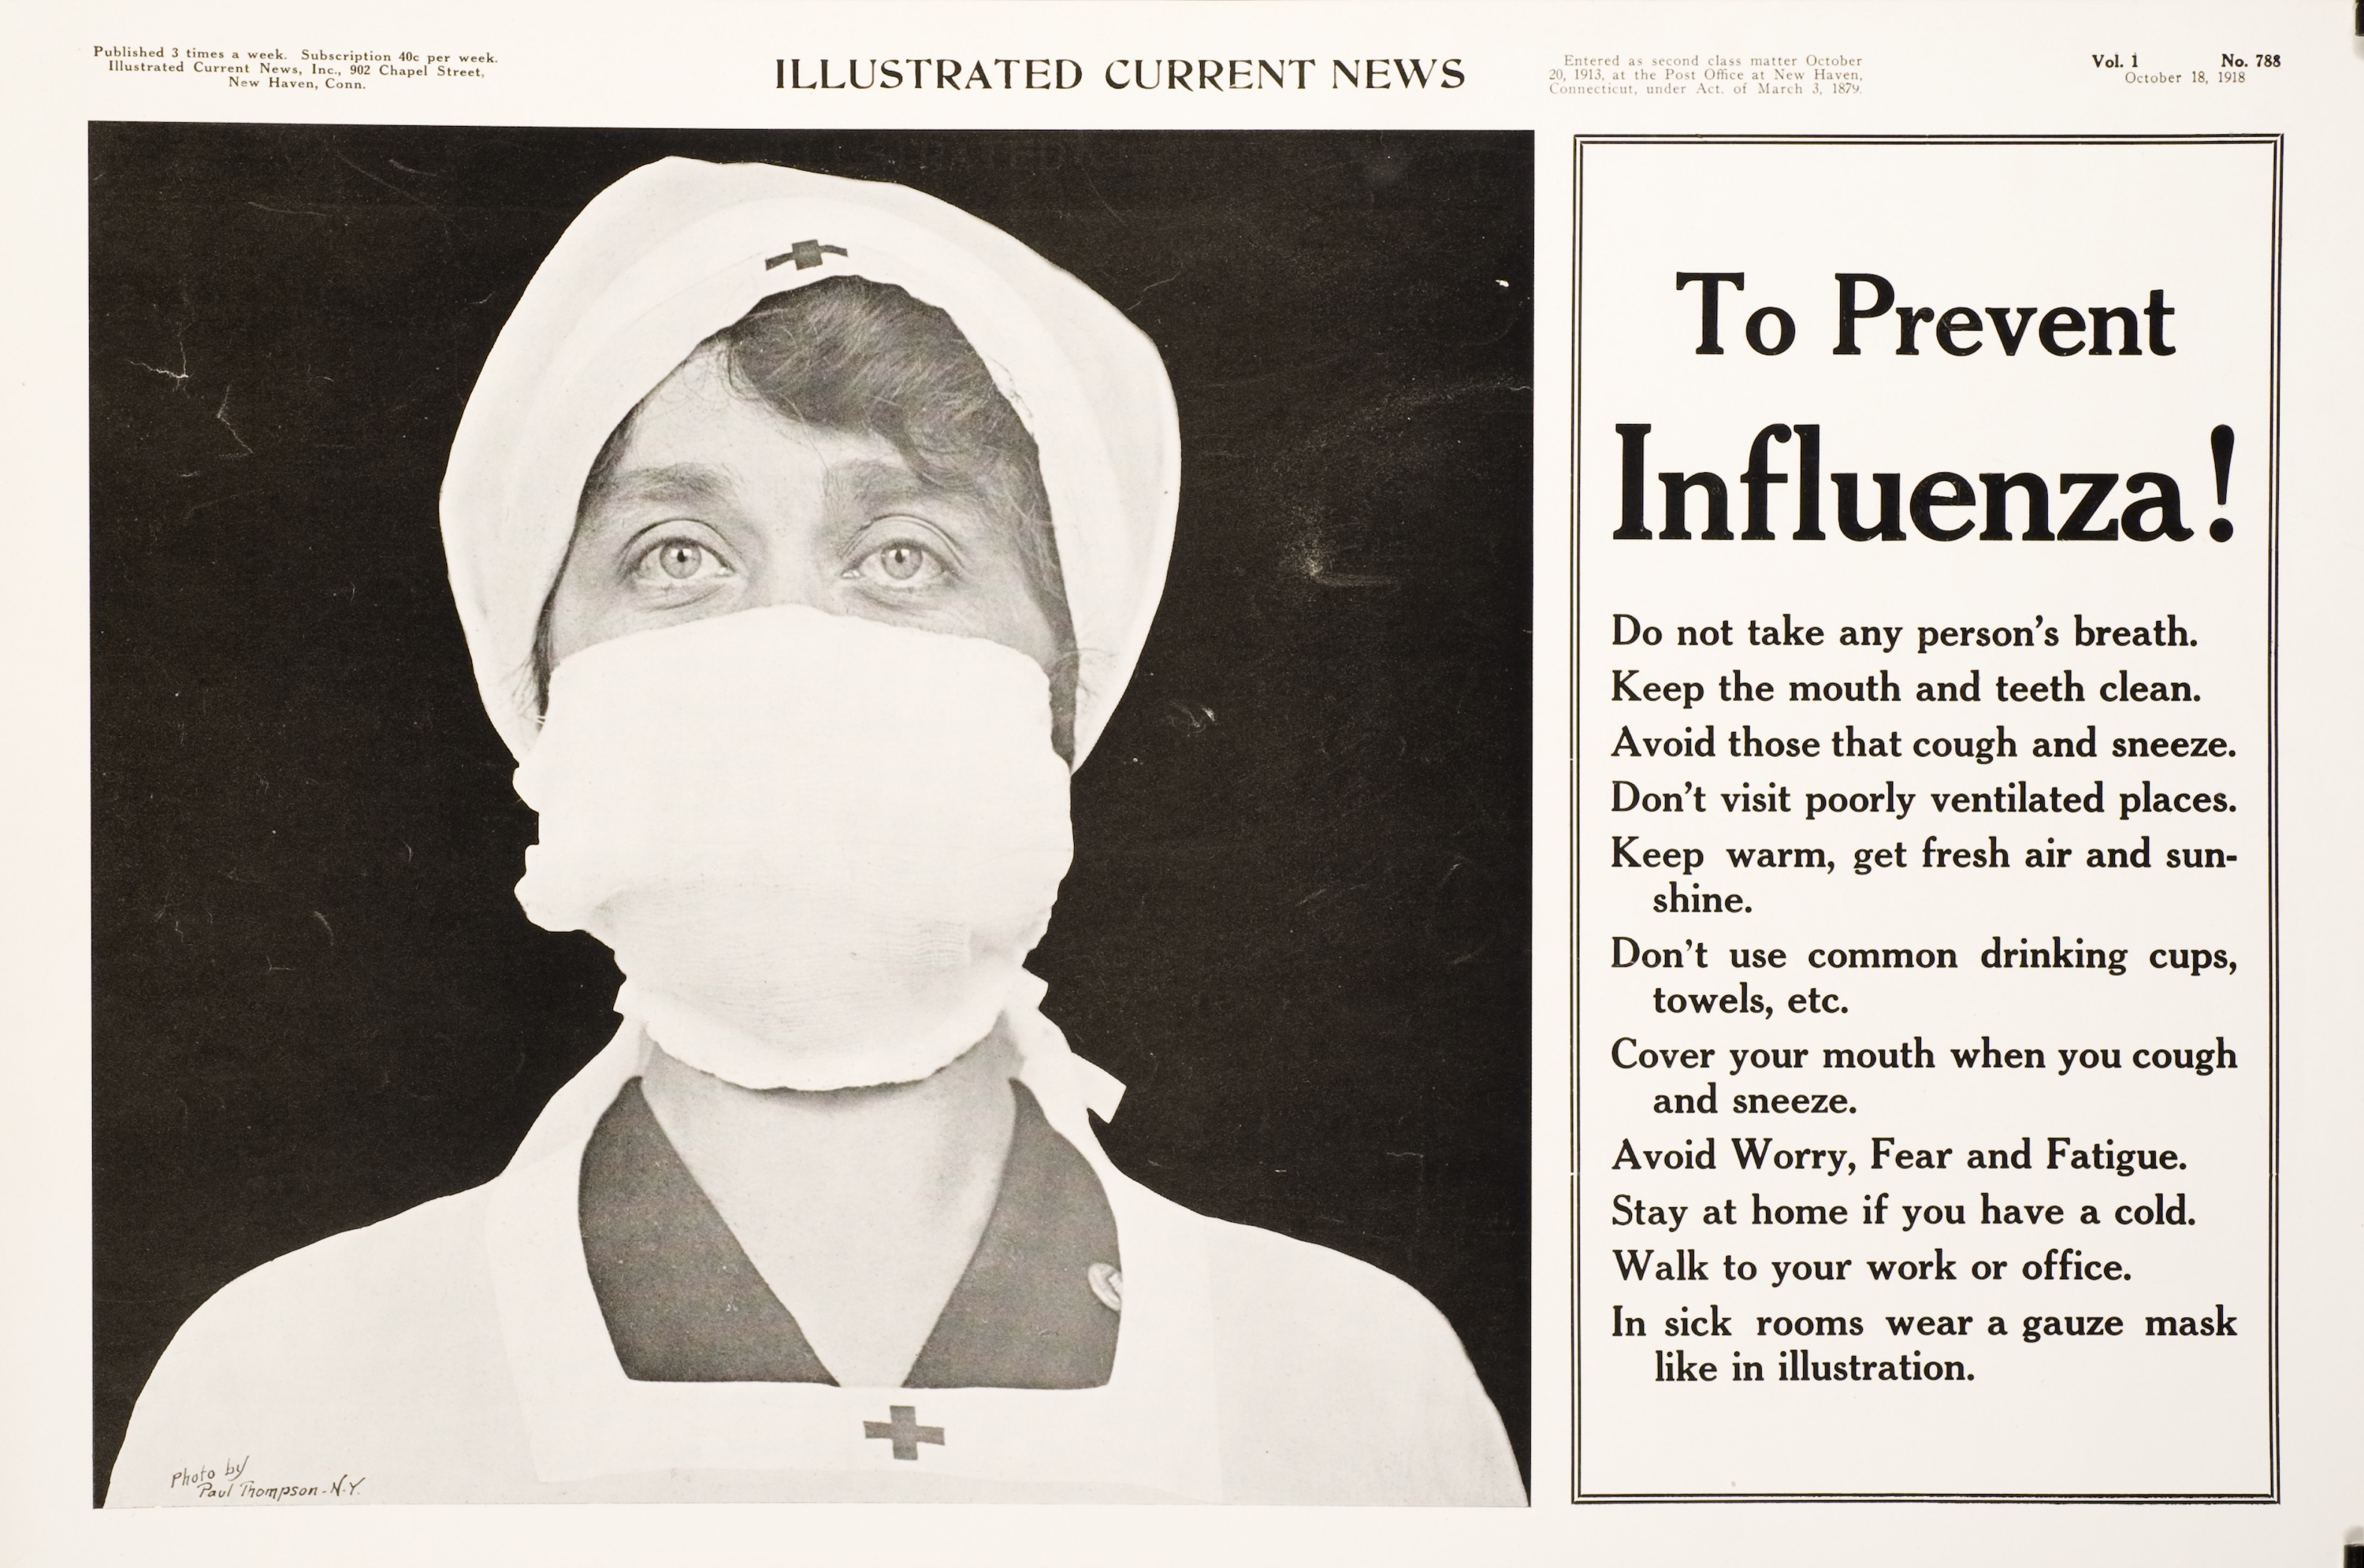 A woman wearing a red cross and a mask over her face illustrates an announcement that says, "To Prevent Influenza!"